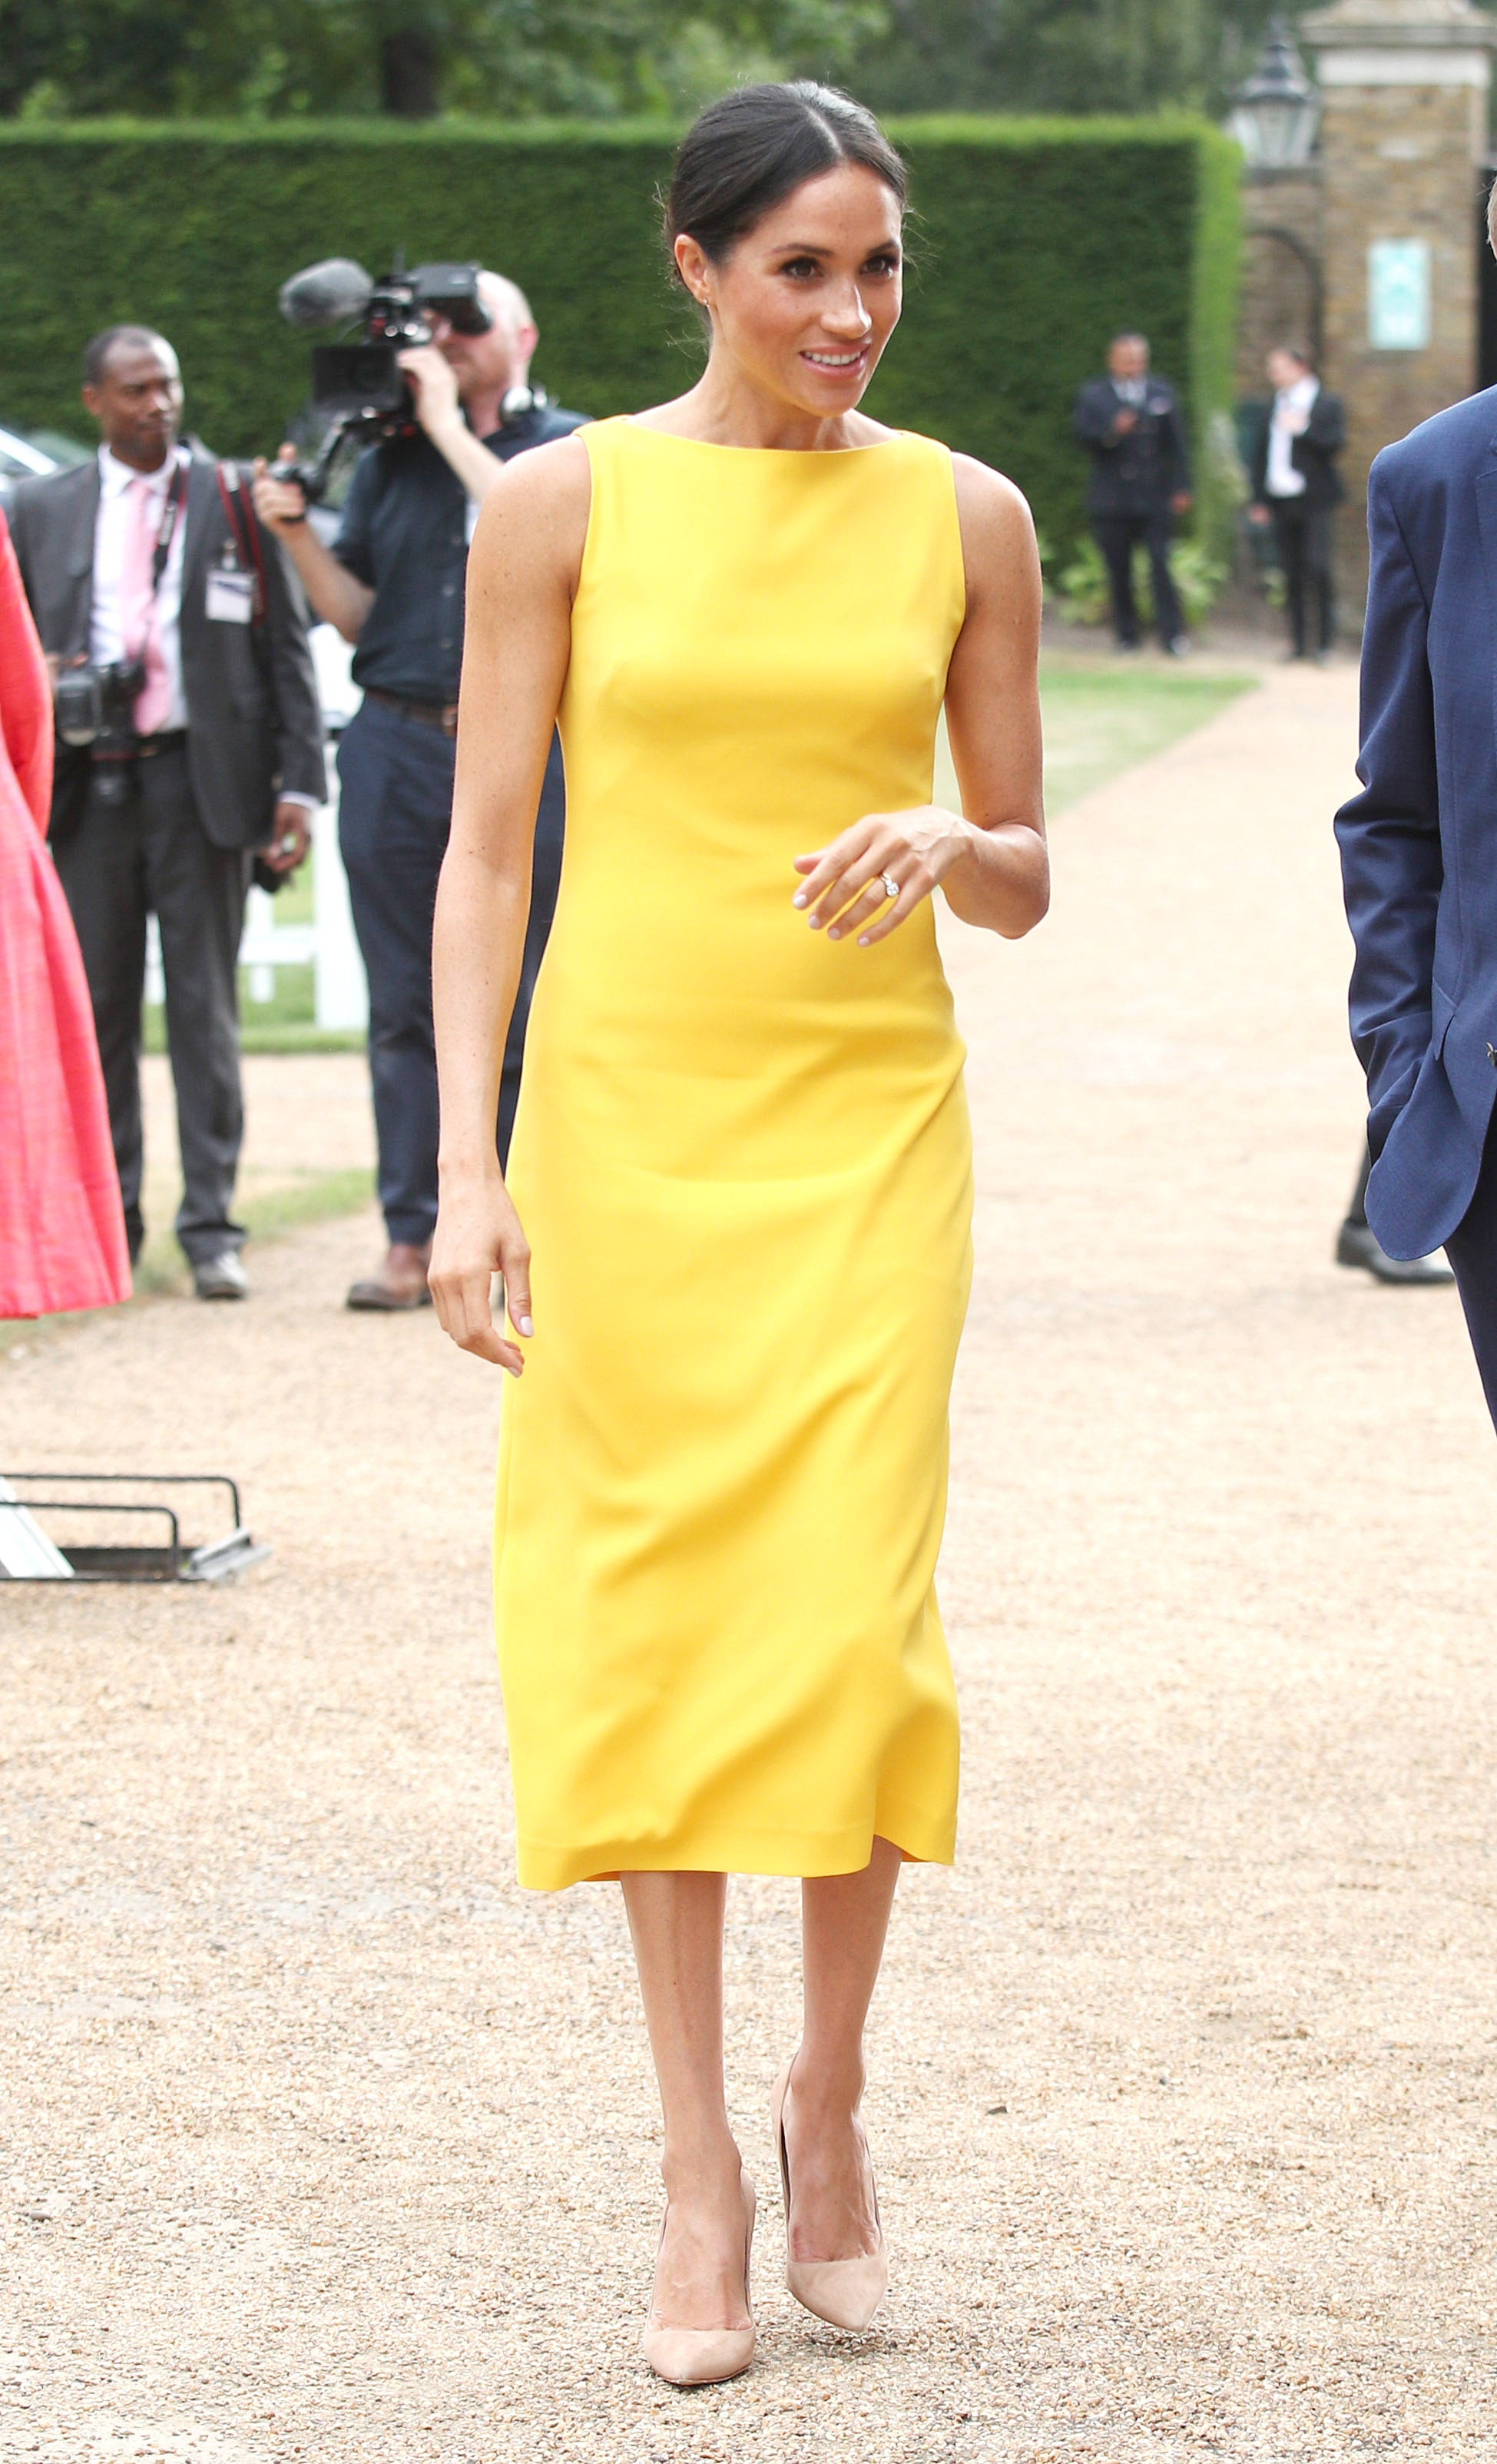 Meghan chose a vibrant yellow outfit.